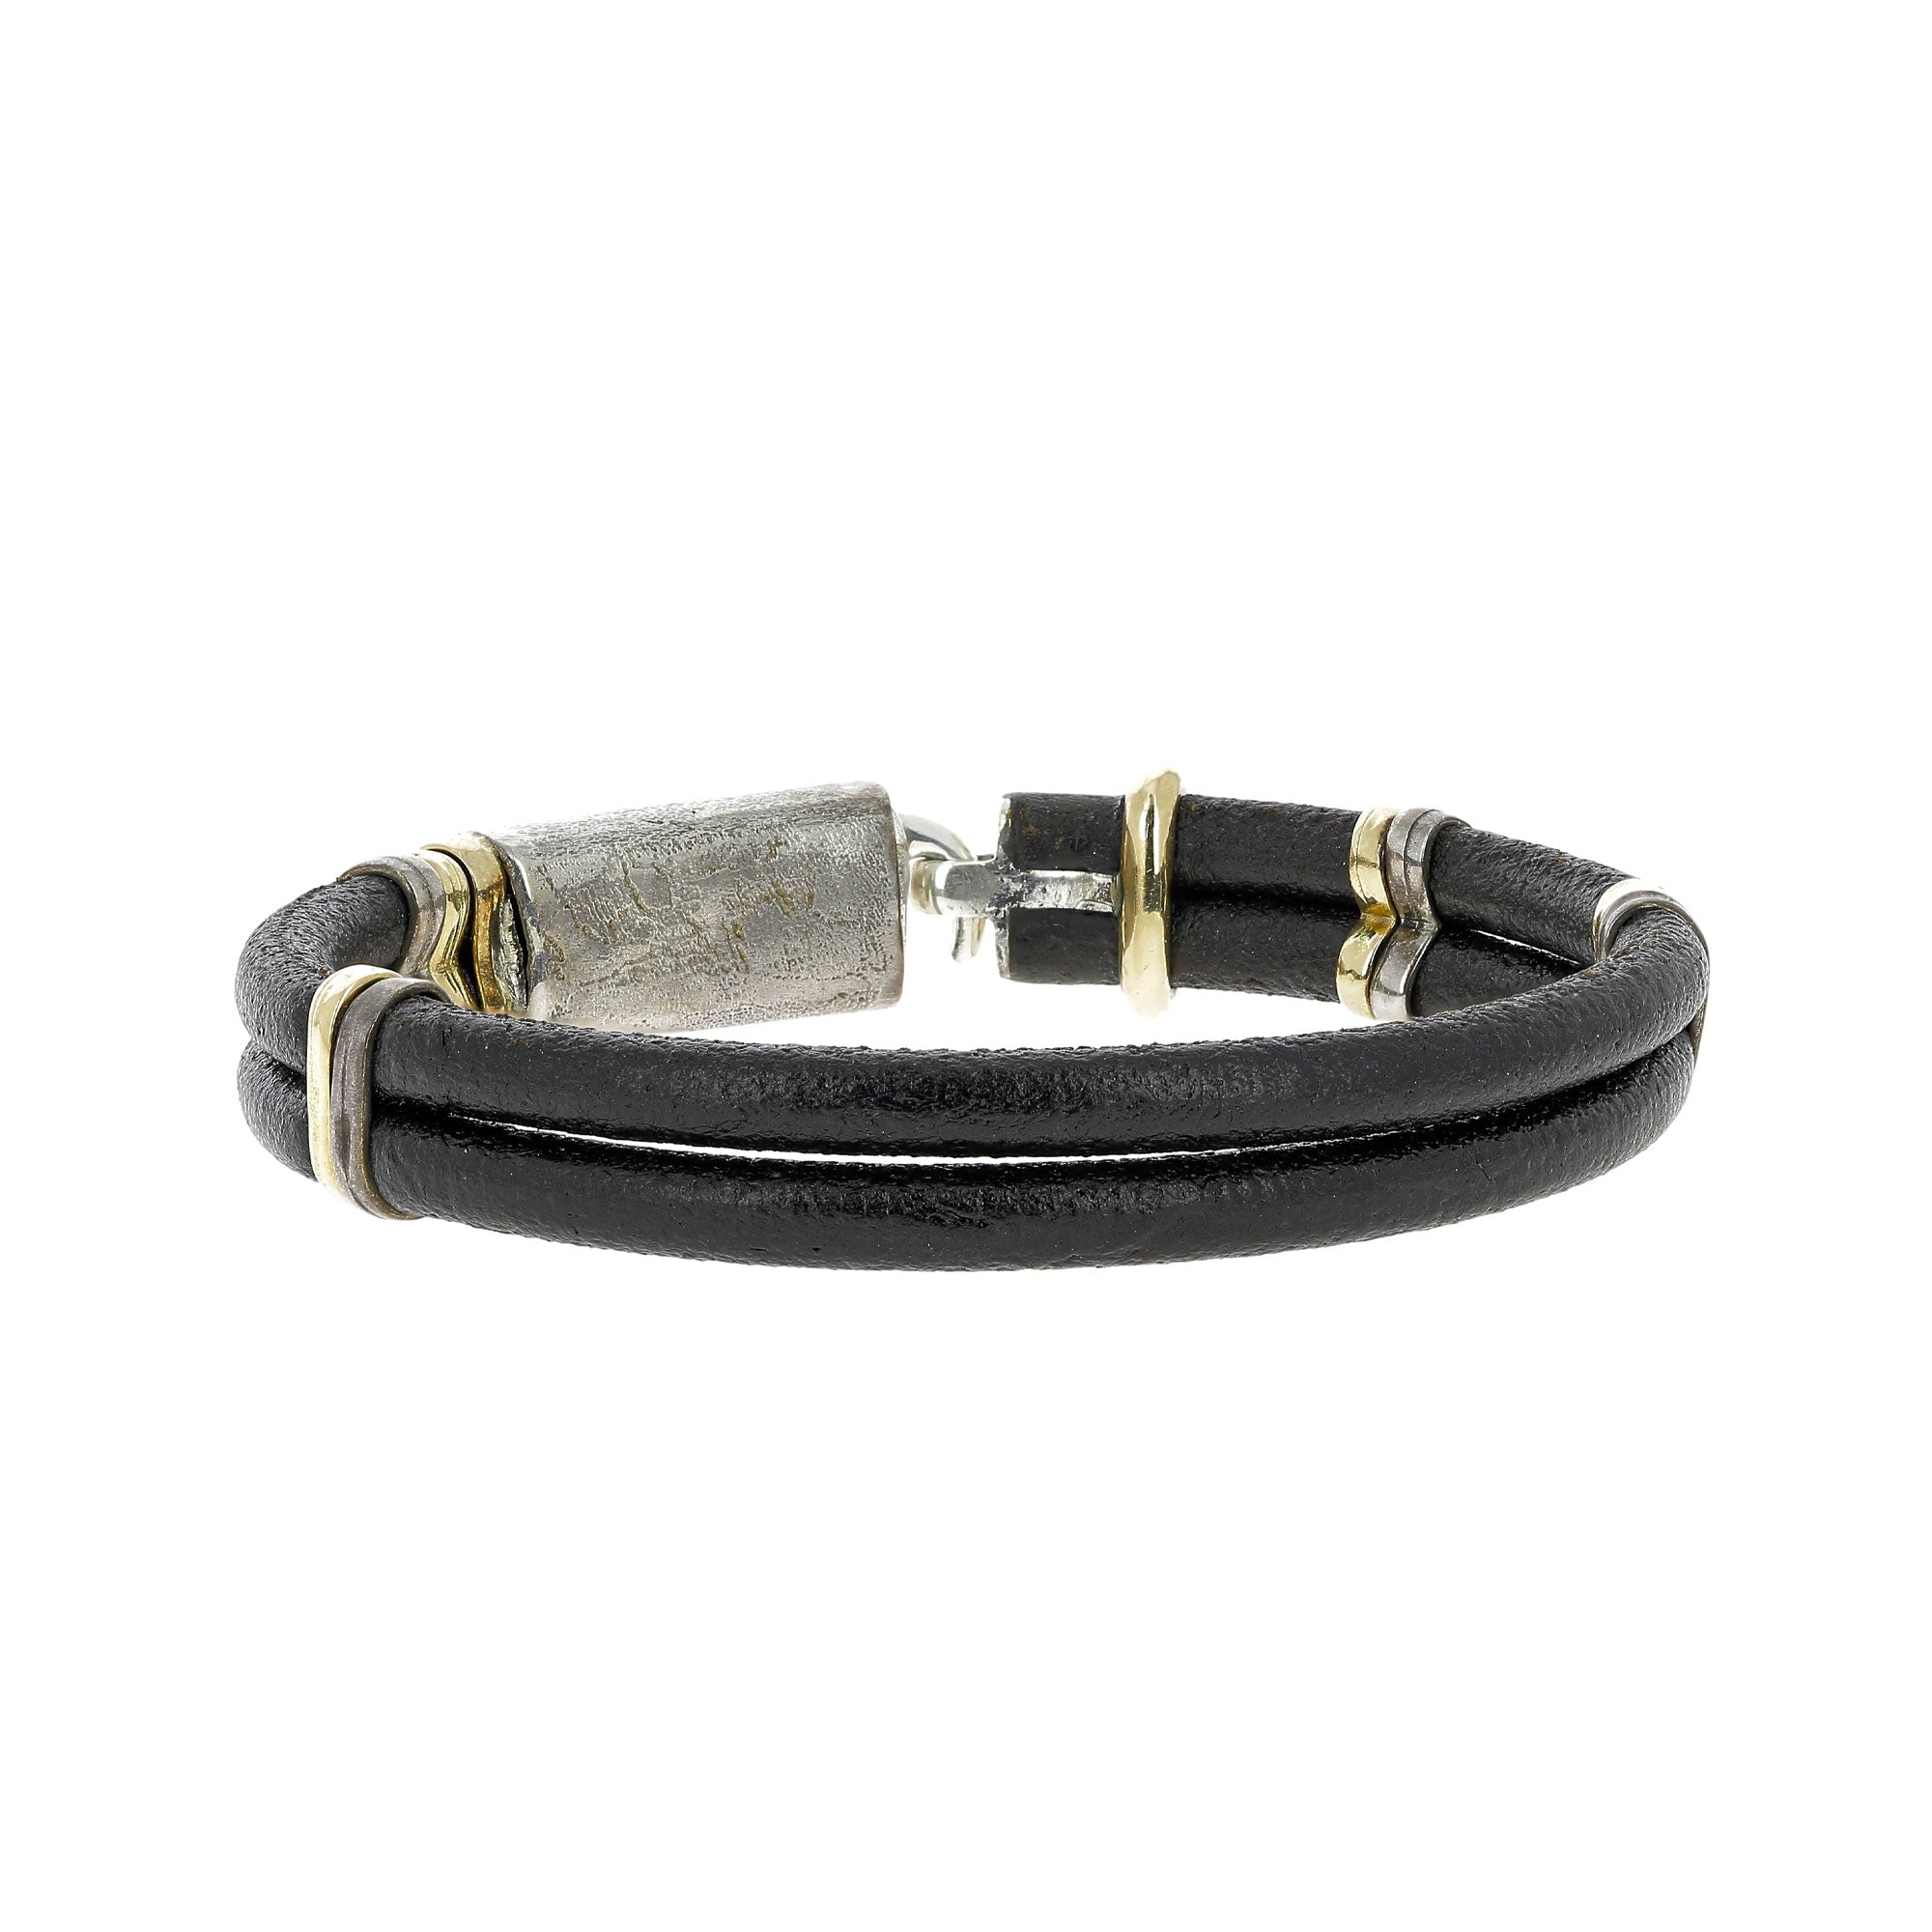 Misani 5mm Leather with Gold & Silver Bracelet